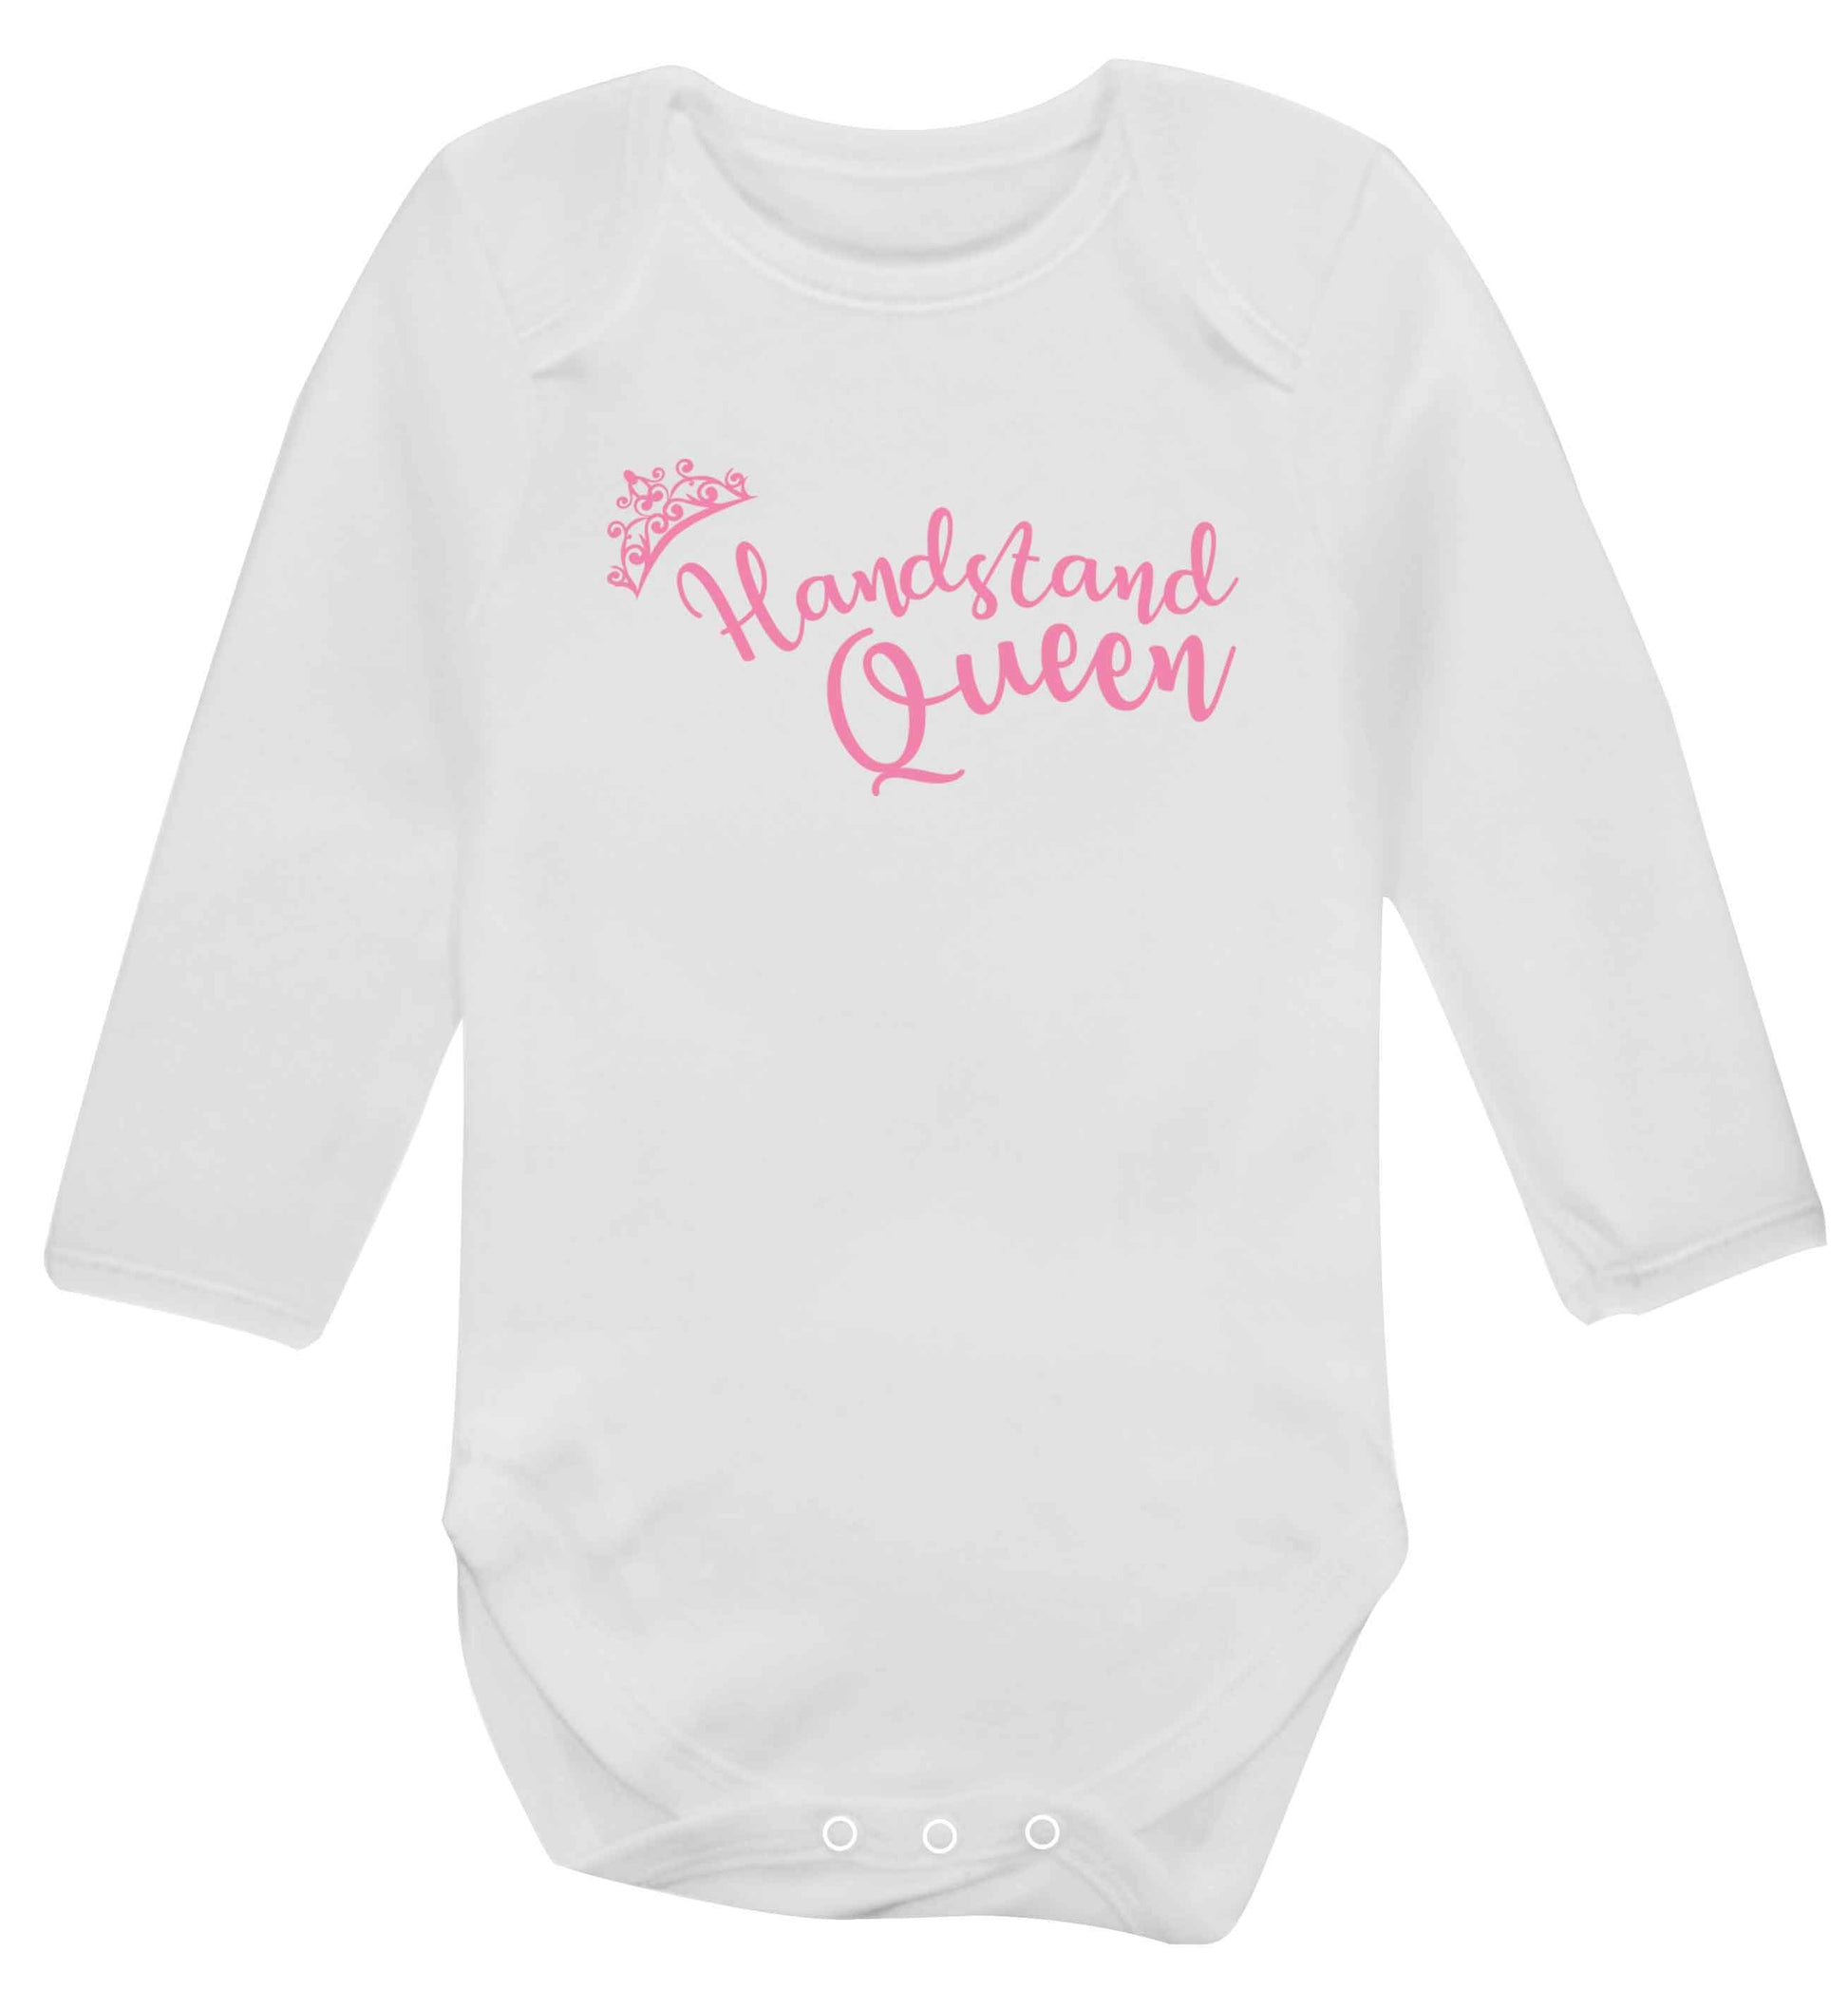 Handstand Queen Baby Vest long sleeved white 6-12 months